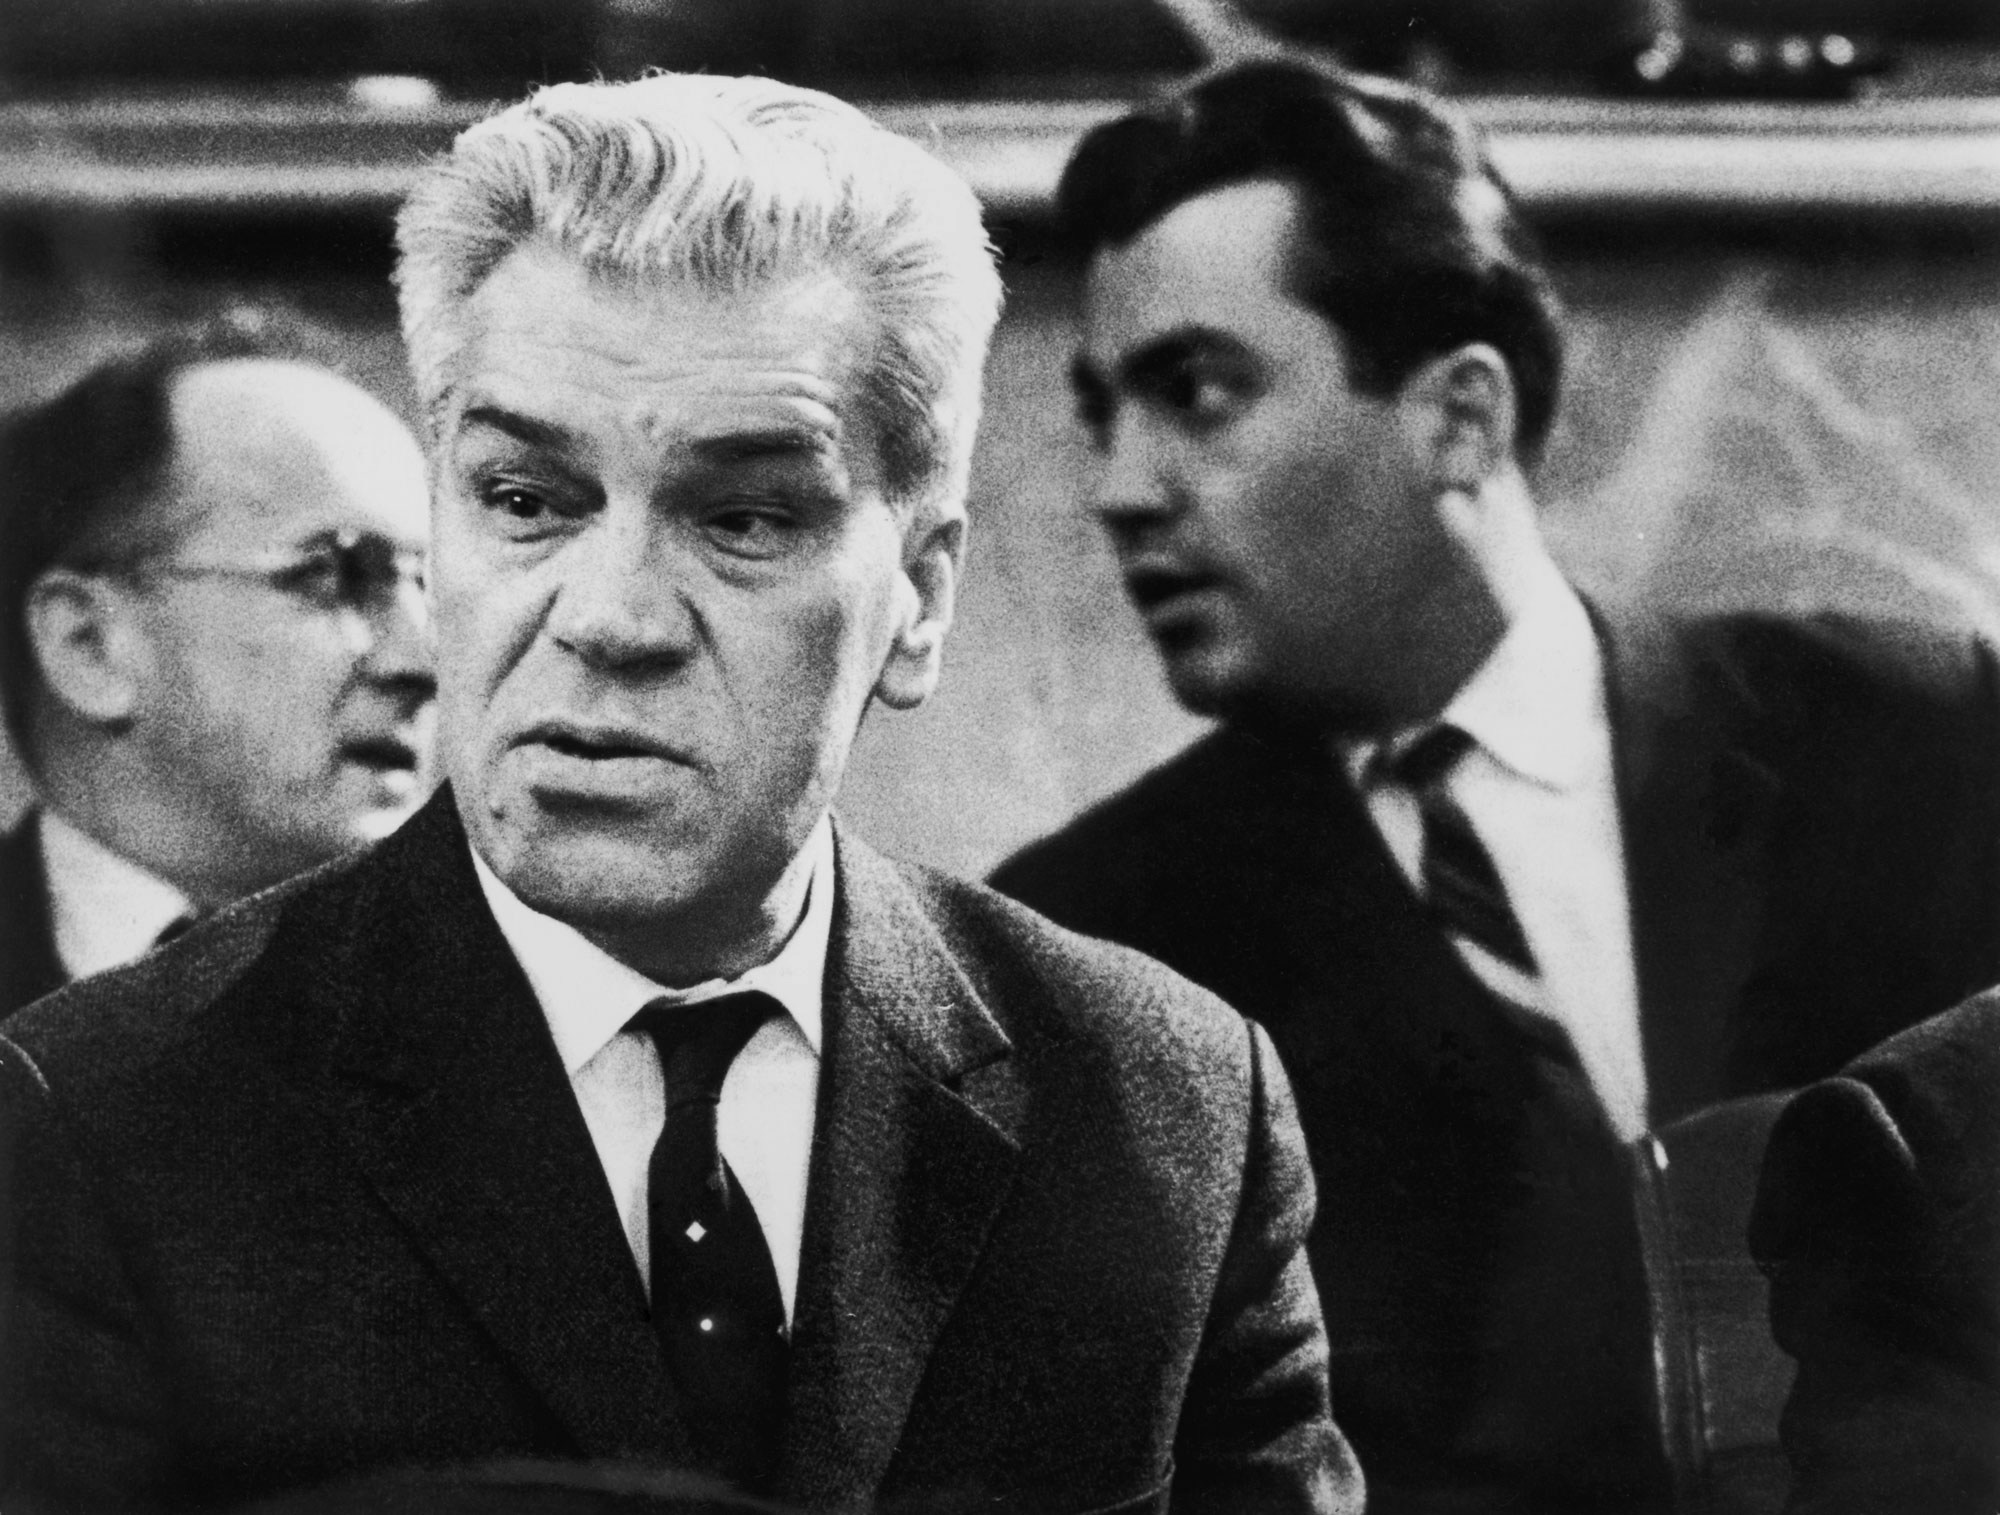 Chief Soviet delegate Semyon Tsarapkin (centre) and colleague Yuri Nosenko (1927 - 2008, right) at the Geneva Disarmament Conference, February 1964. A few days later Nosenko, a Lieutenant Colonel in the KGB, disappeared and later defected to the US.  (Photo by Central Press/Hulton Archive/Getty Images)